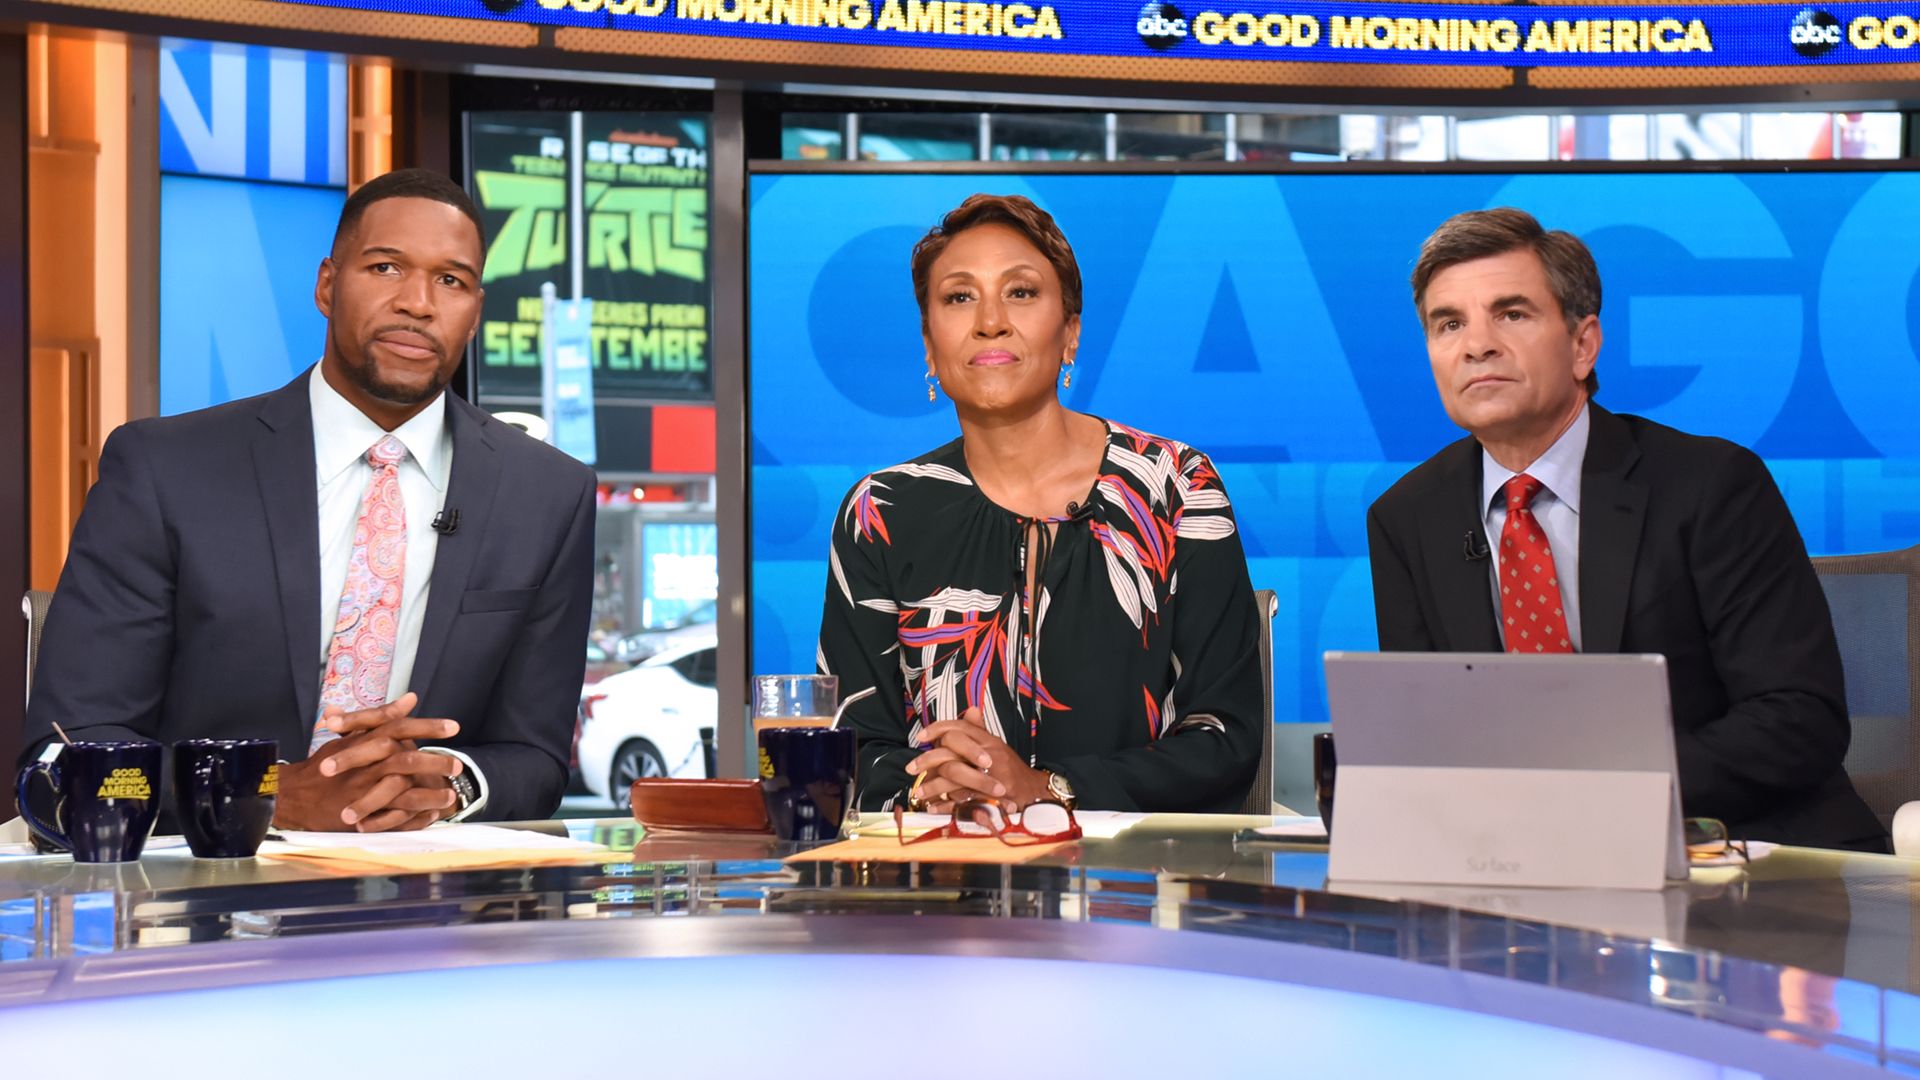 Michael Strahan, Robin Roberts and George Stephanopoulos hosting GMA